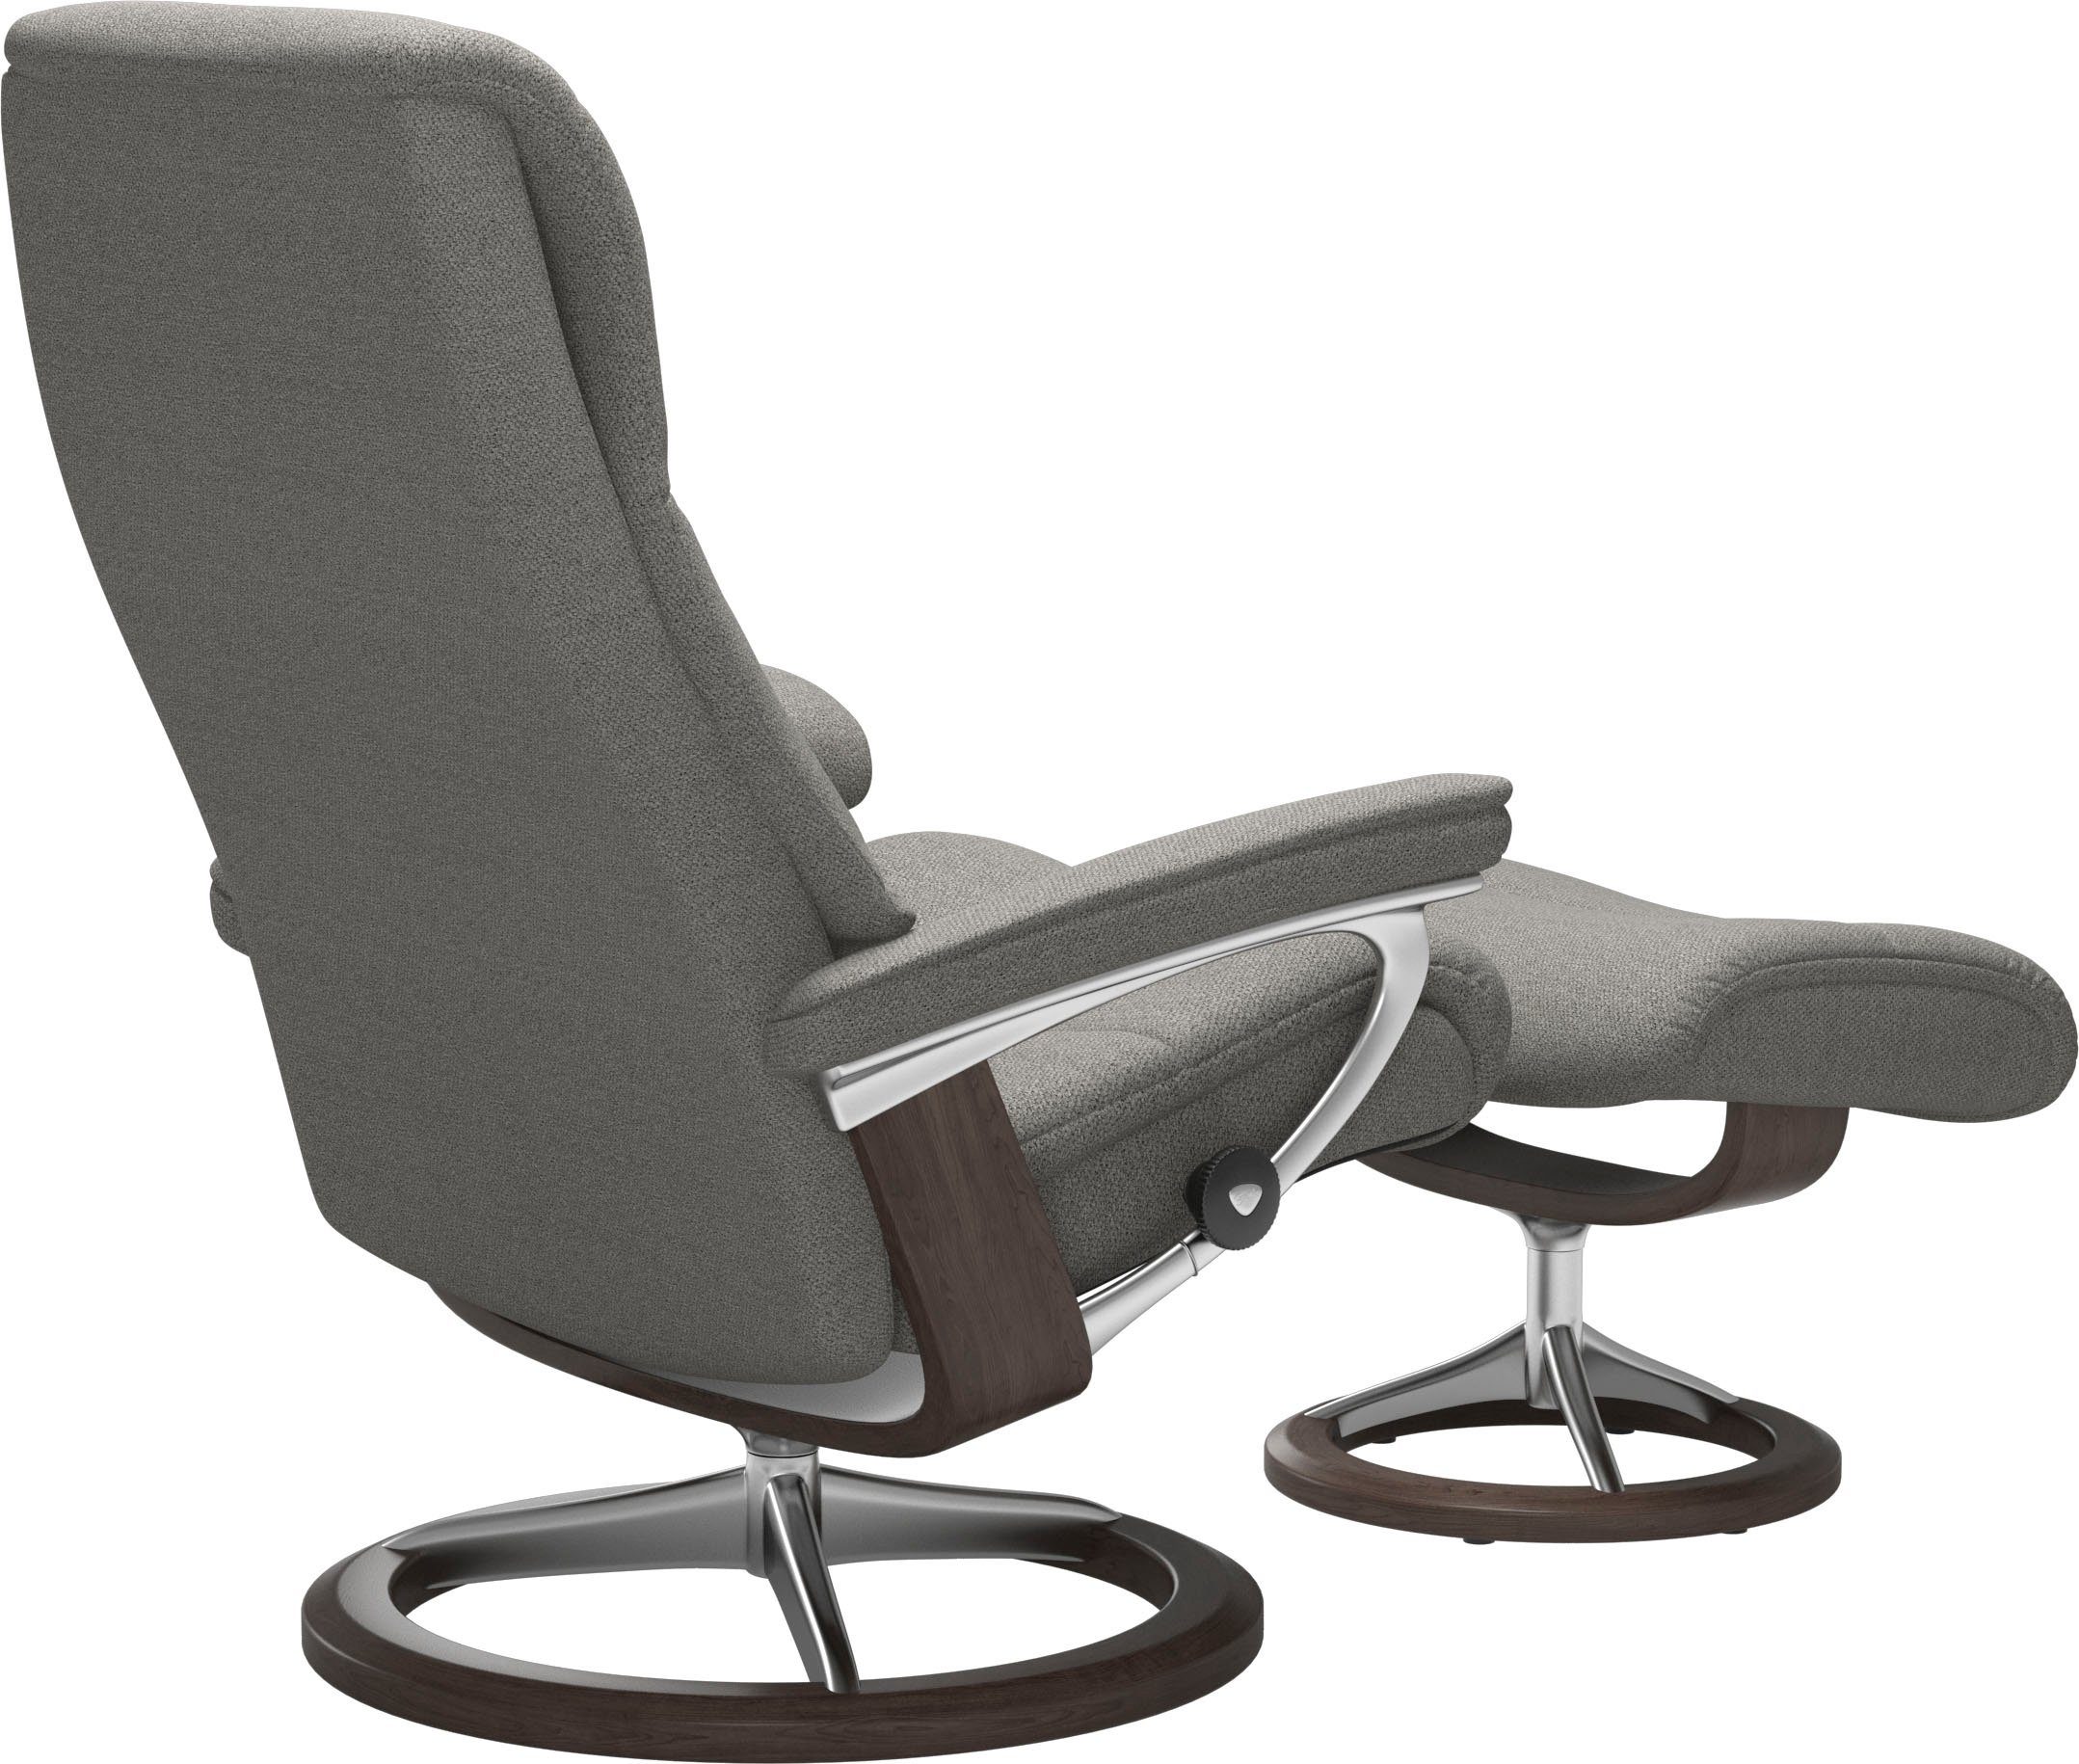 mit View, Stressless® Größe Signature S,Gestell Base, Relaxsessel Wenge